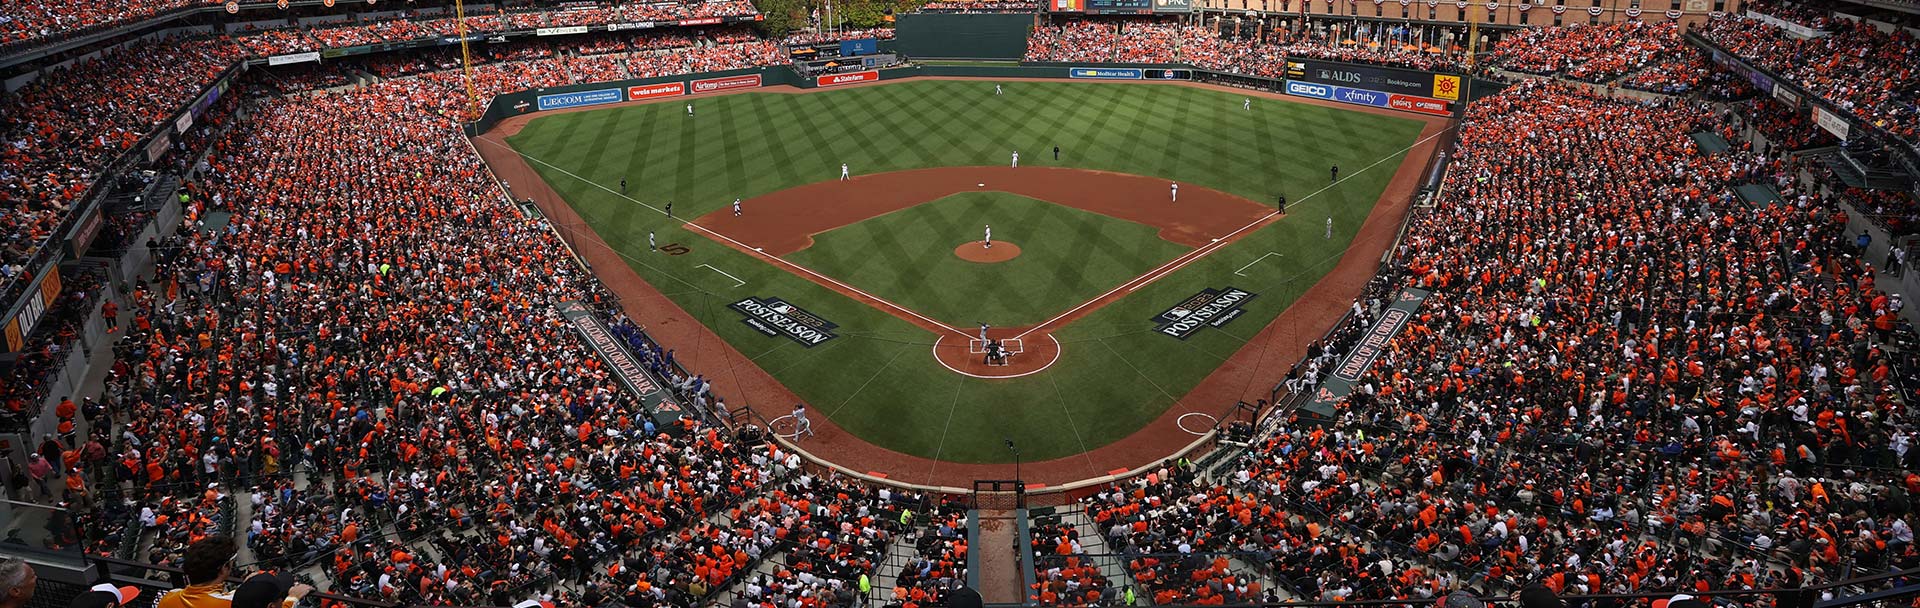 Wide-angle photo of a sold-out home Orioles game. The view is from behind home plate, high up in the stands. The left and right field stands are seen.